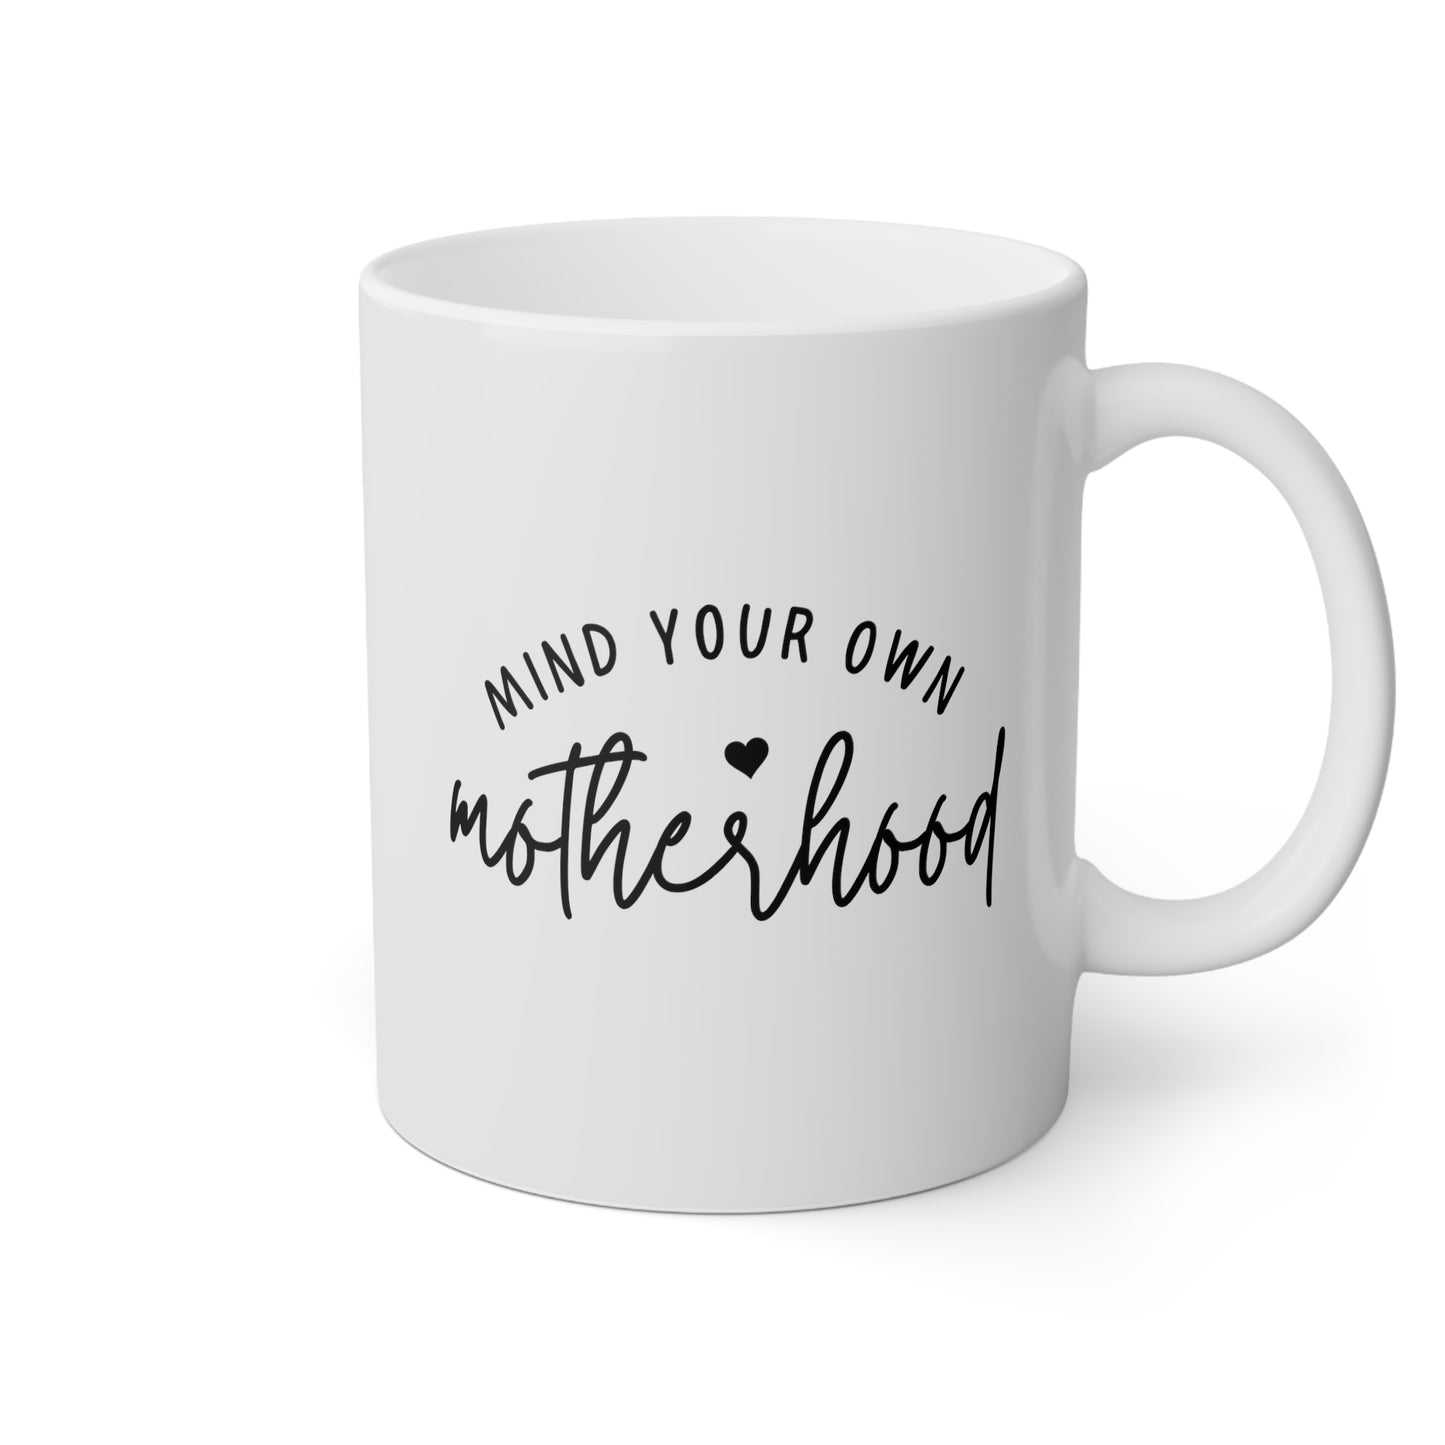 Mind Your Own Motherhood 11oz white funny large coffee mug gift for sassy new mom mother's day mama pregnancy announcement waveywares wavey wares wavywares wavy wares